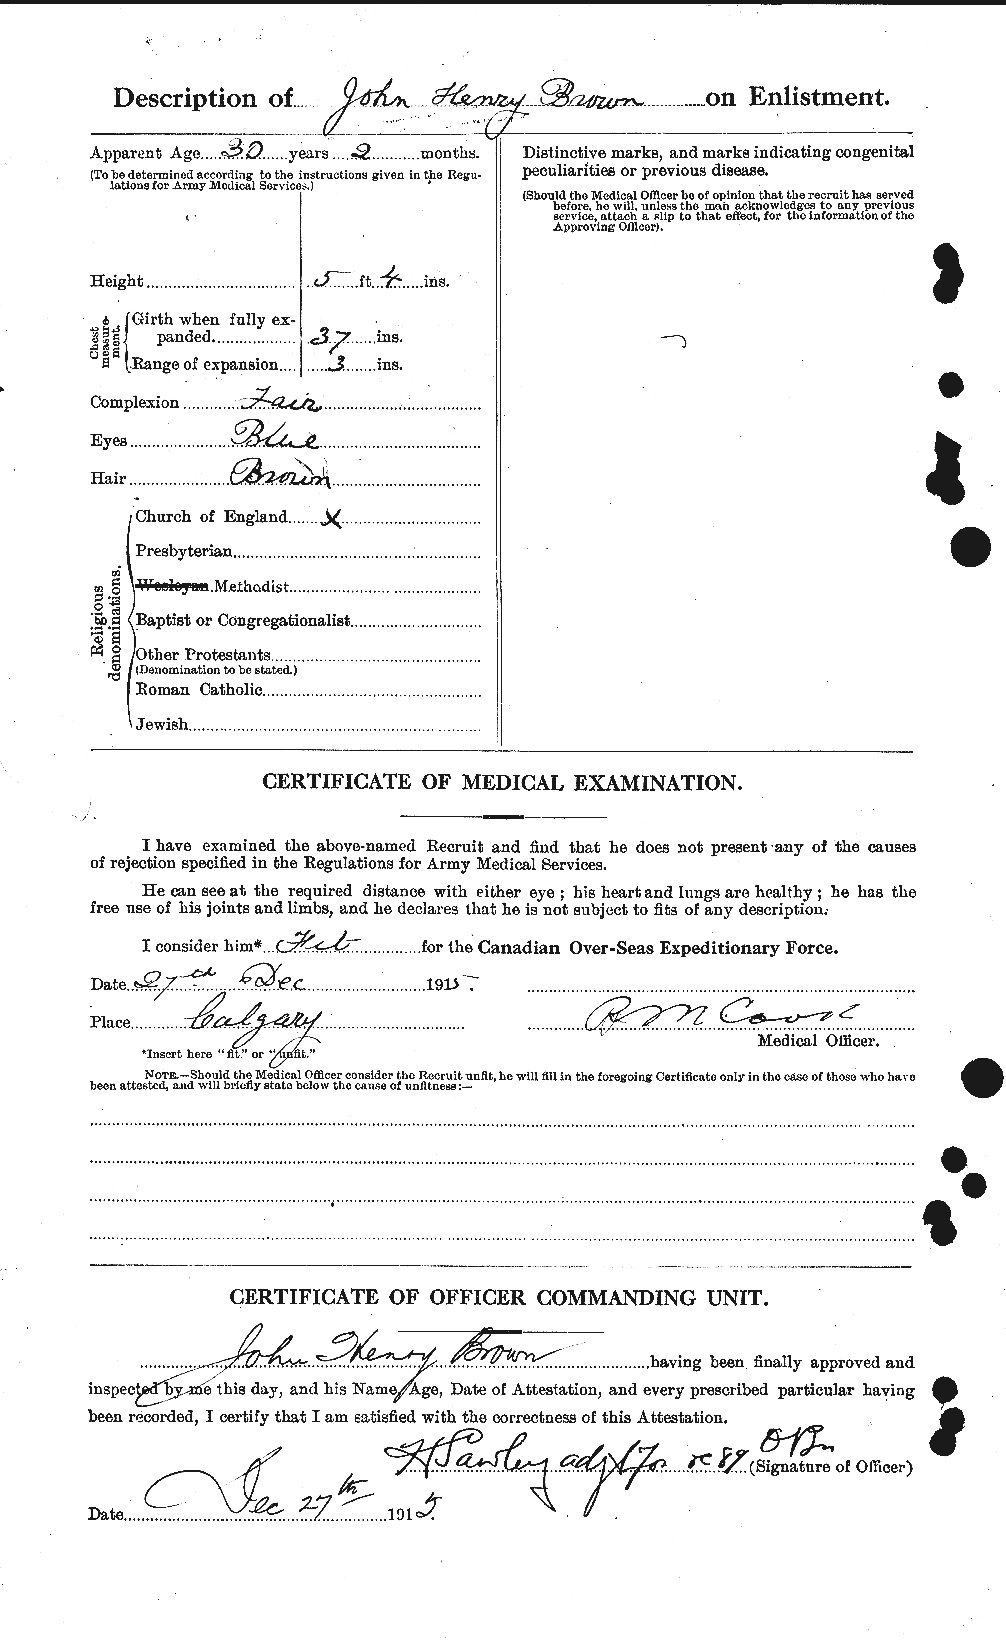 Personnel Records of the First World War - CEF 264613b